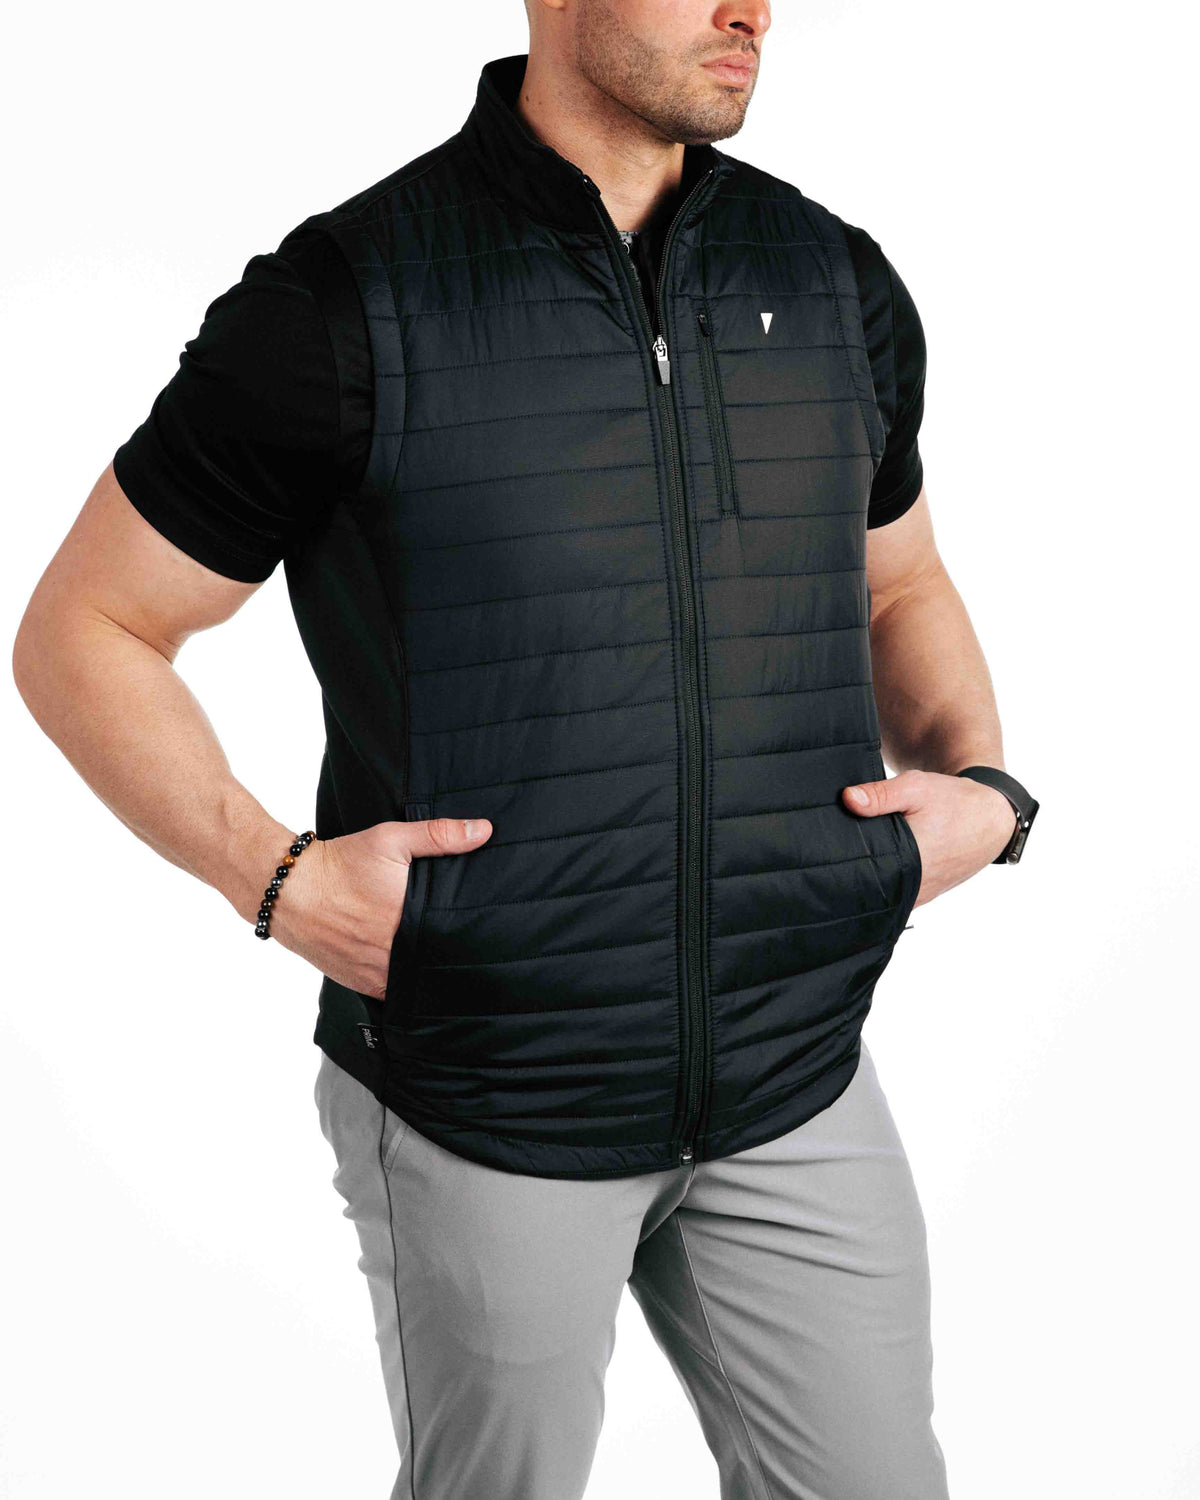 The Primo Golf Black Vest with polo